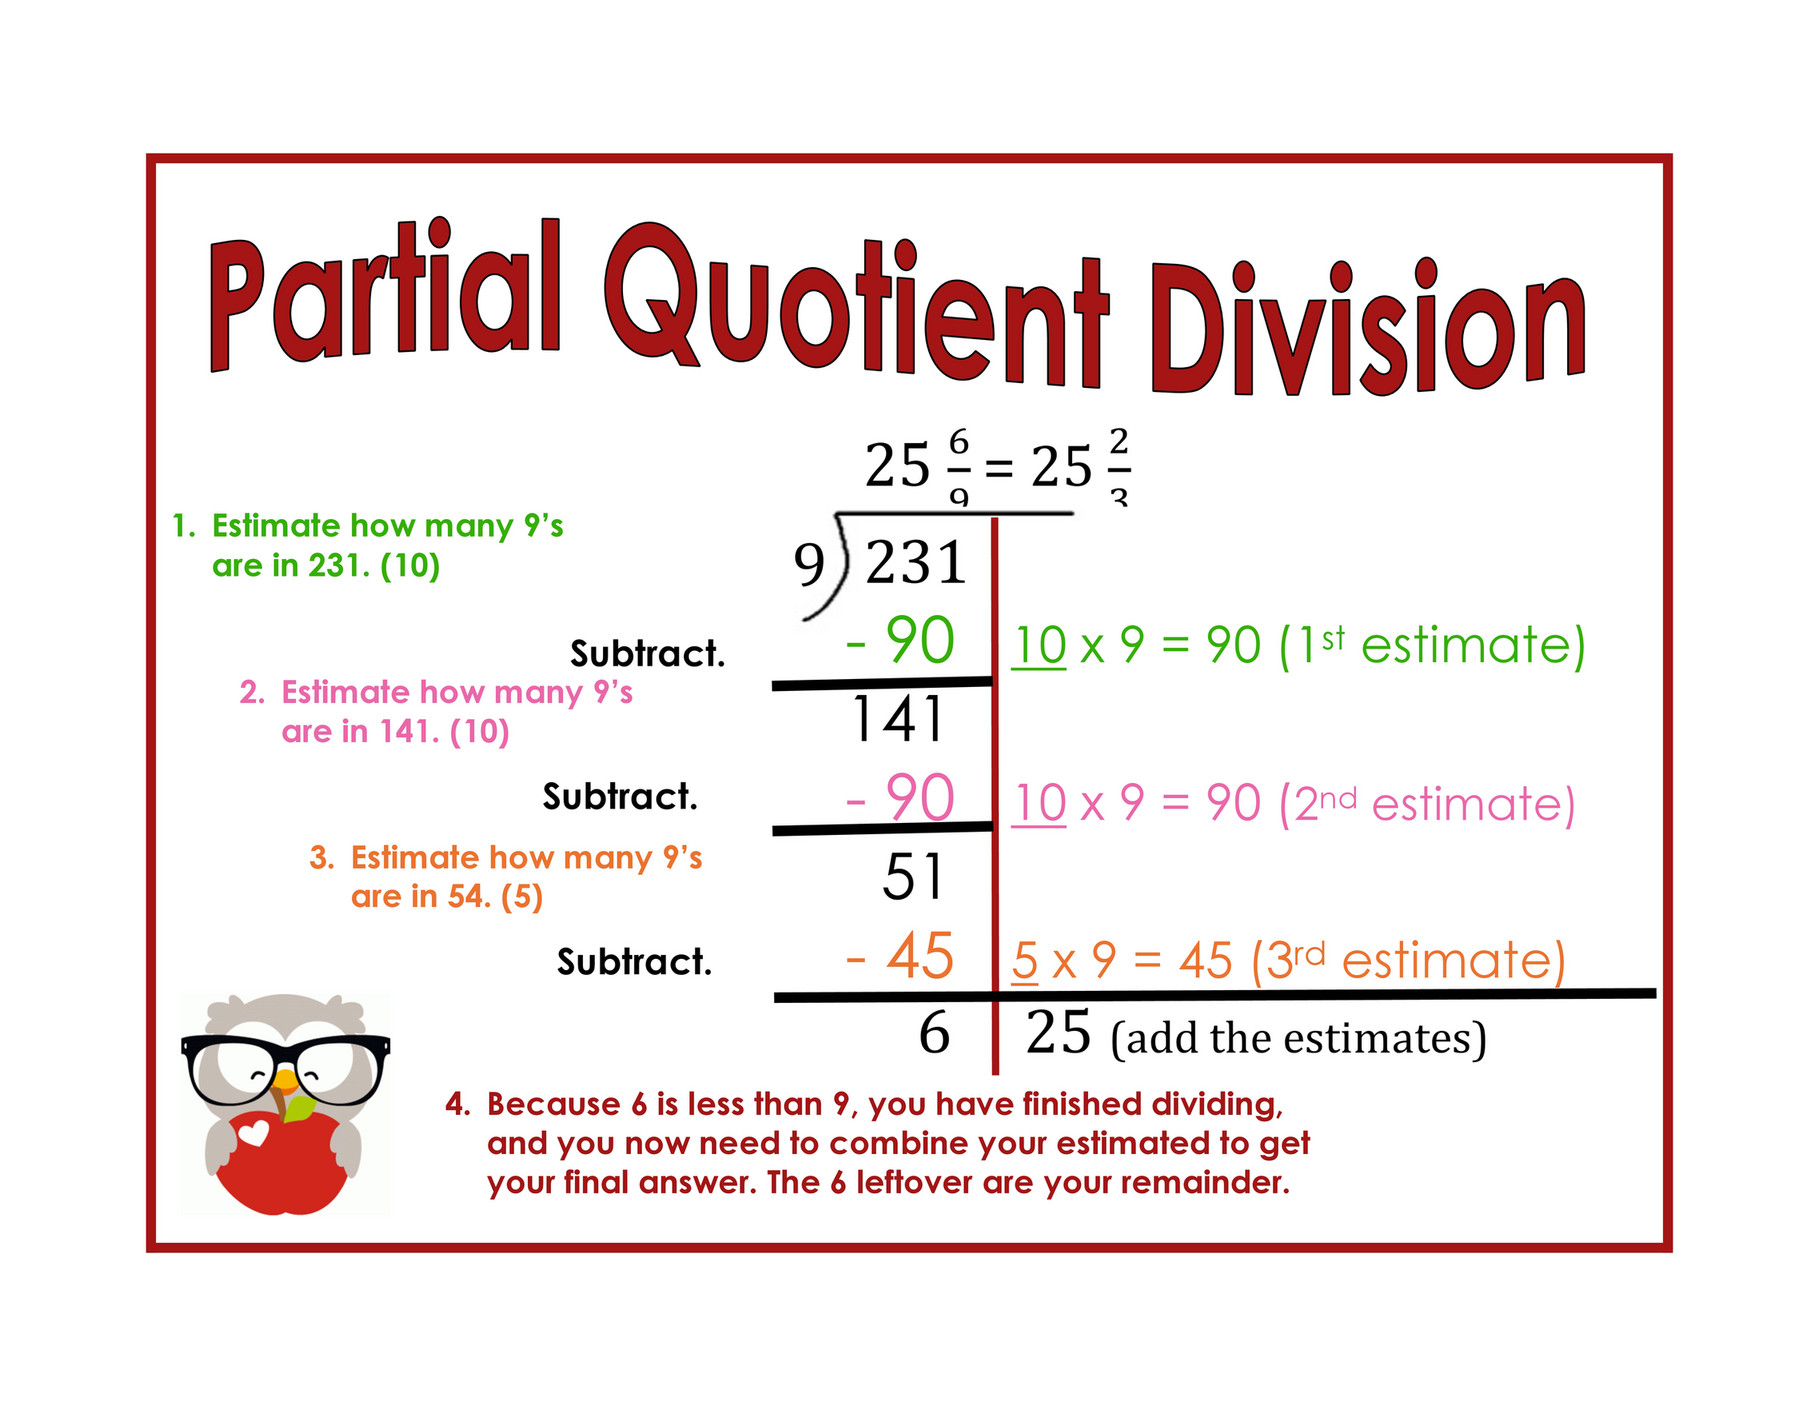 iupui-partial-quotient-division-final-exam-page-1-created-with